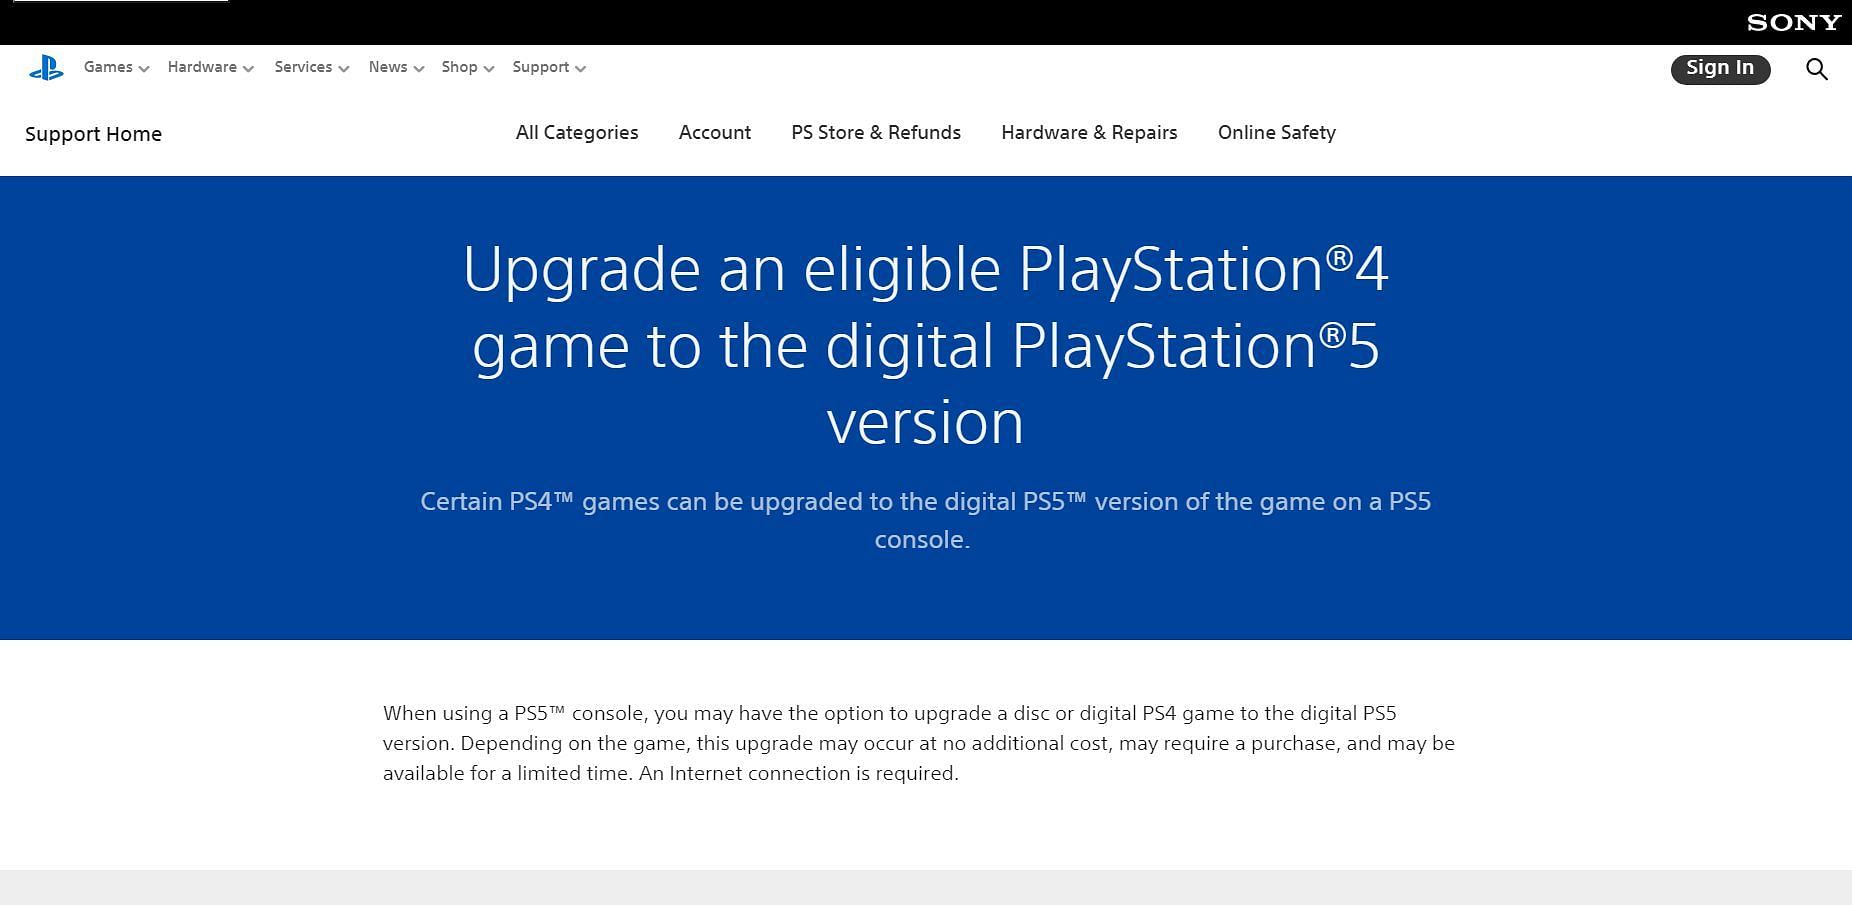 An existing PS4 game on disk is eligible for a digital upgrade to PS5 (Image via PlayStation.com)